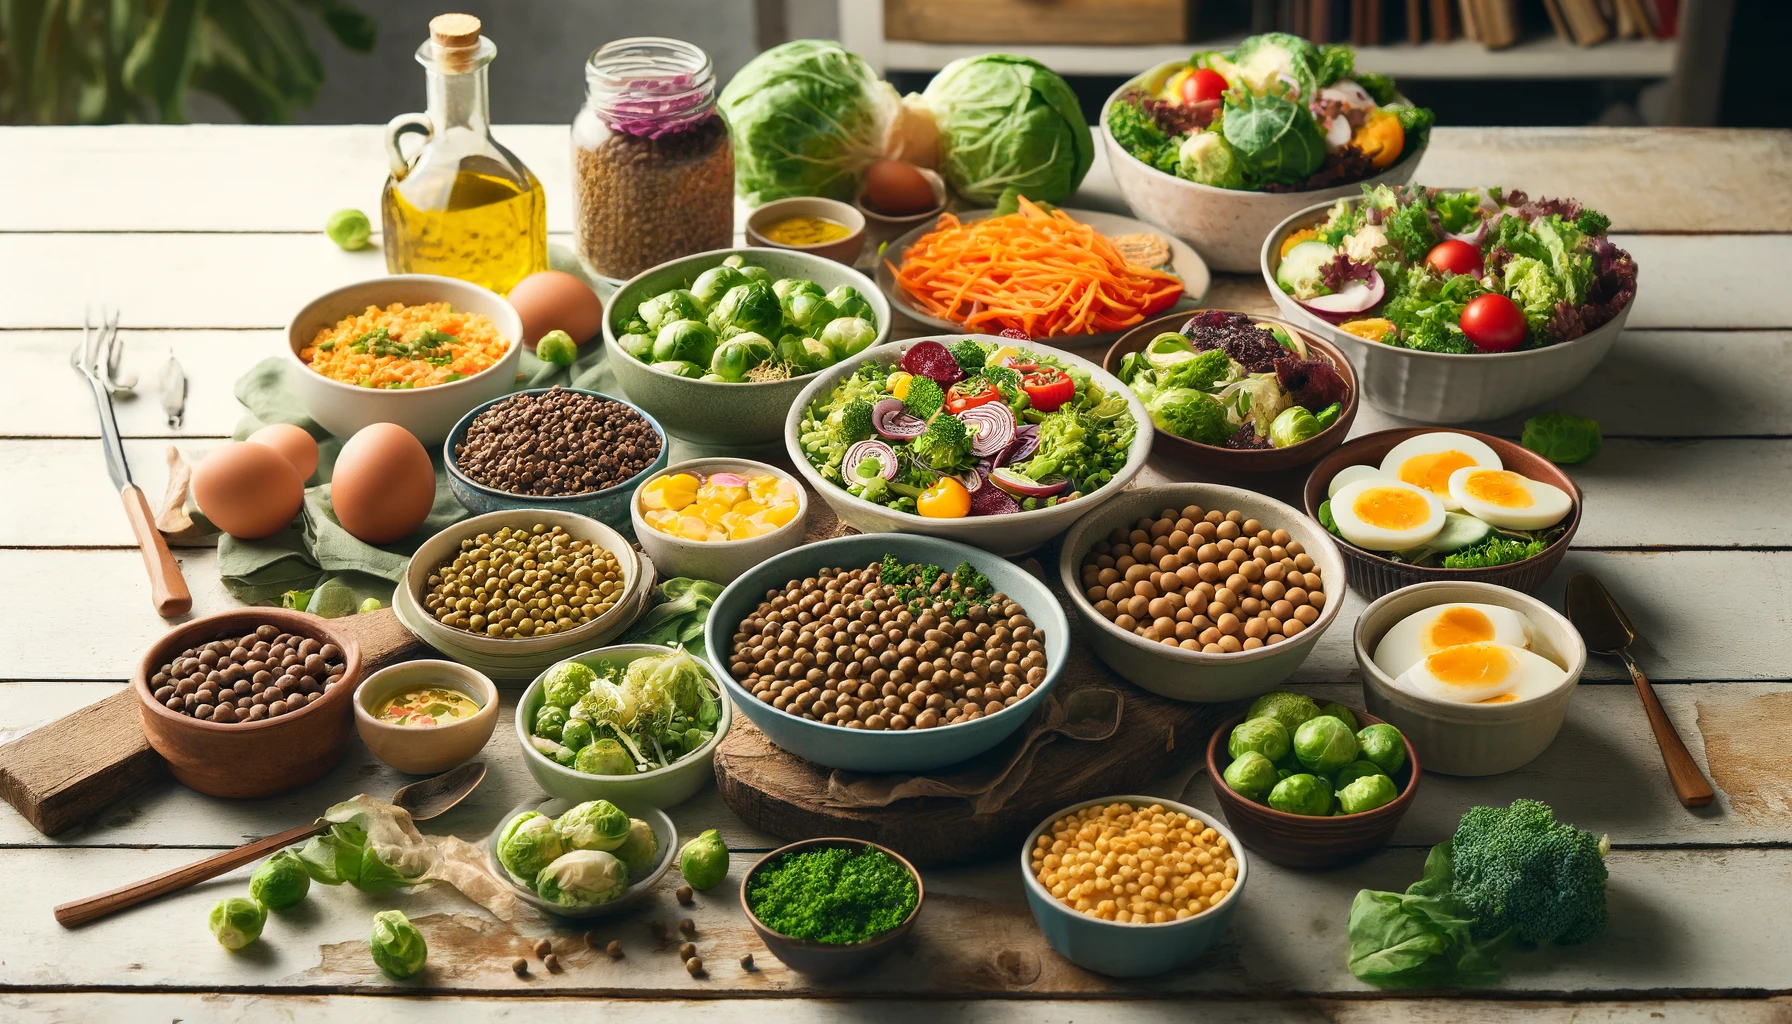 A vibrant and colorful array of salads on a rustic wooden table featuring bowls of legumes like lentils and peas plates of cruciferous vegetables